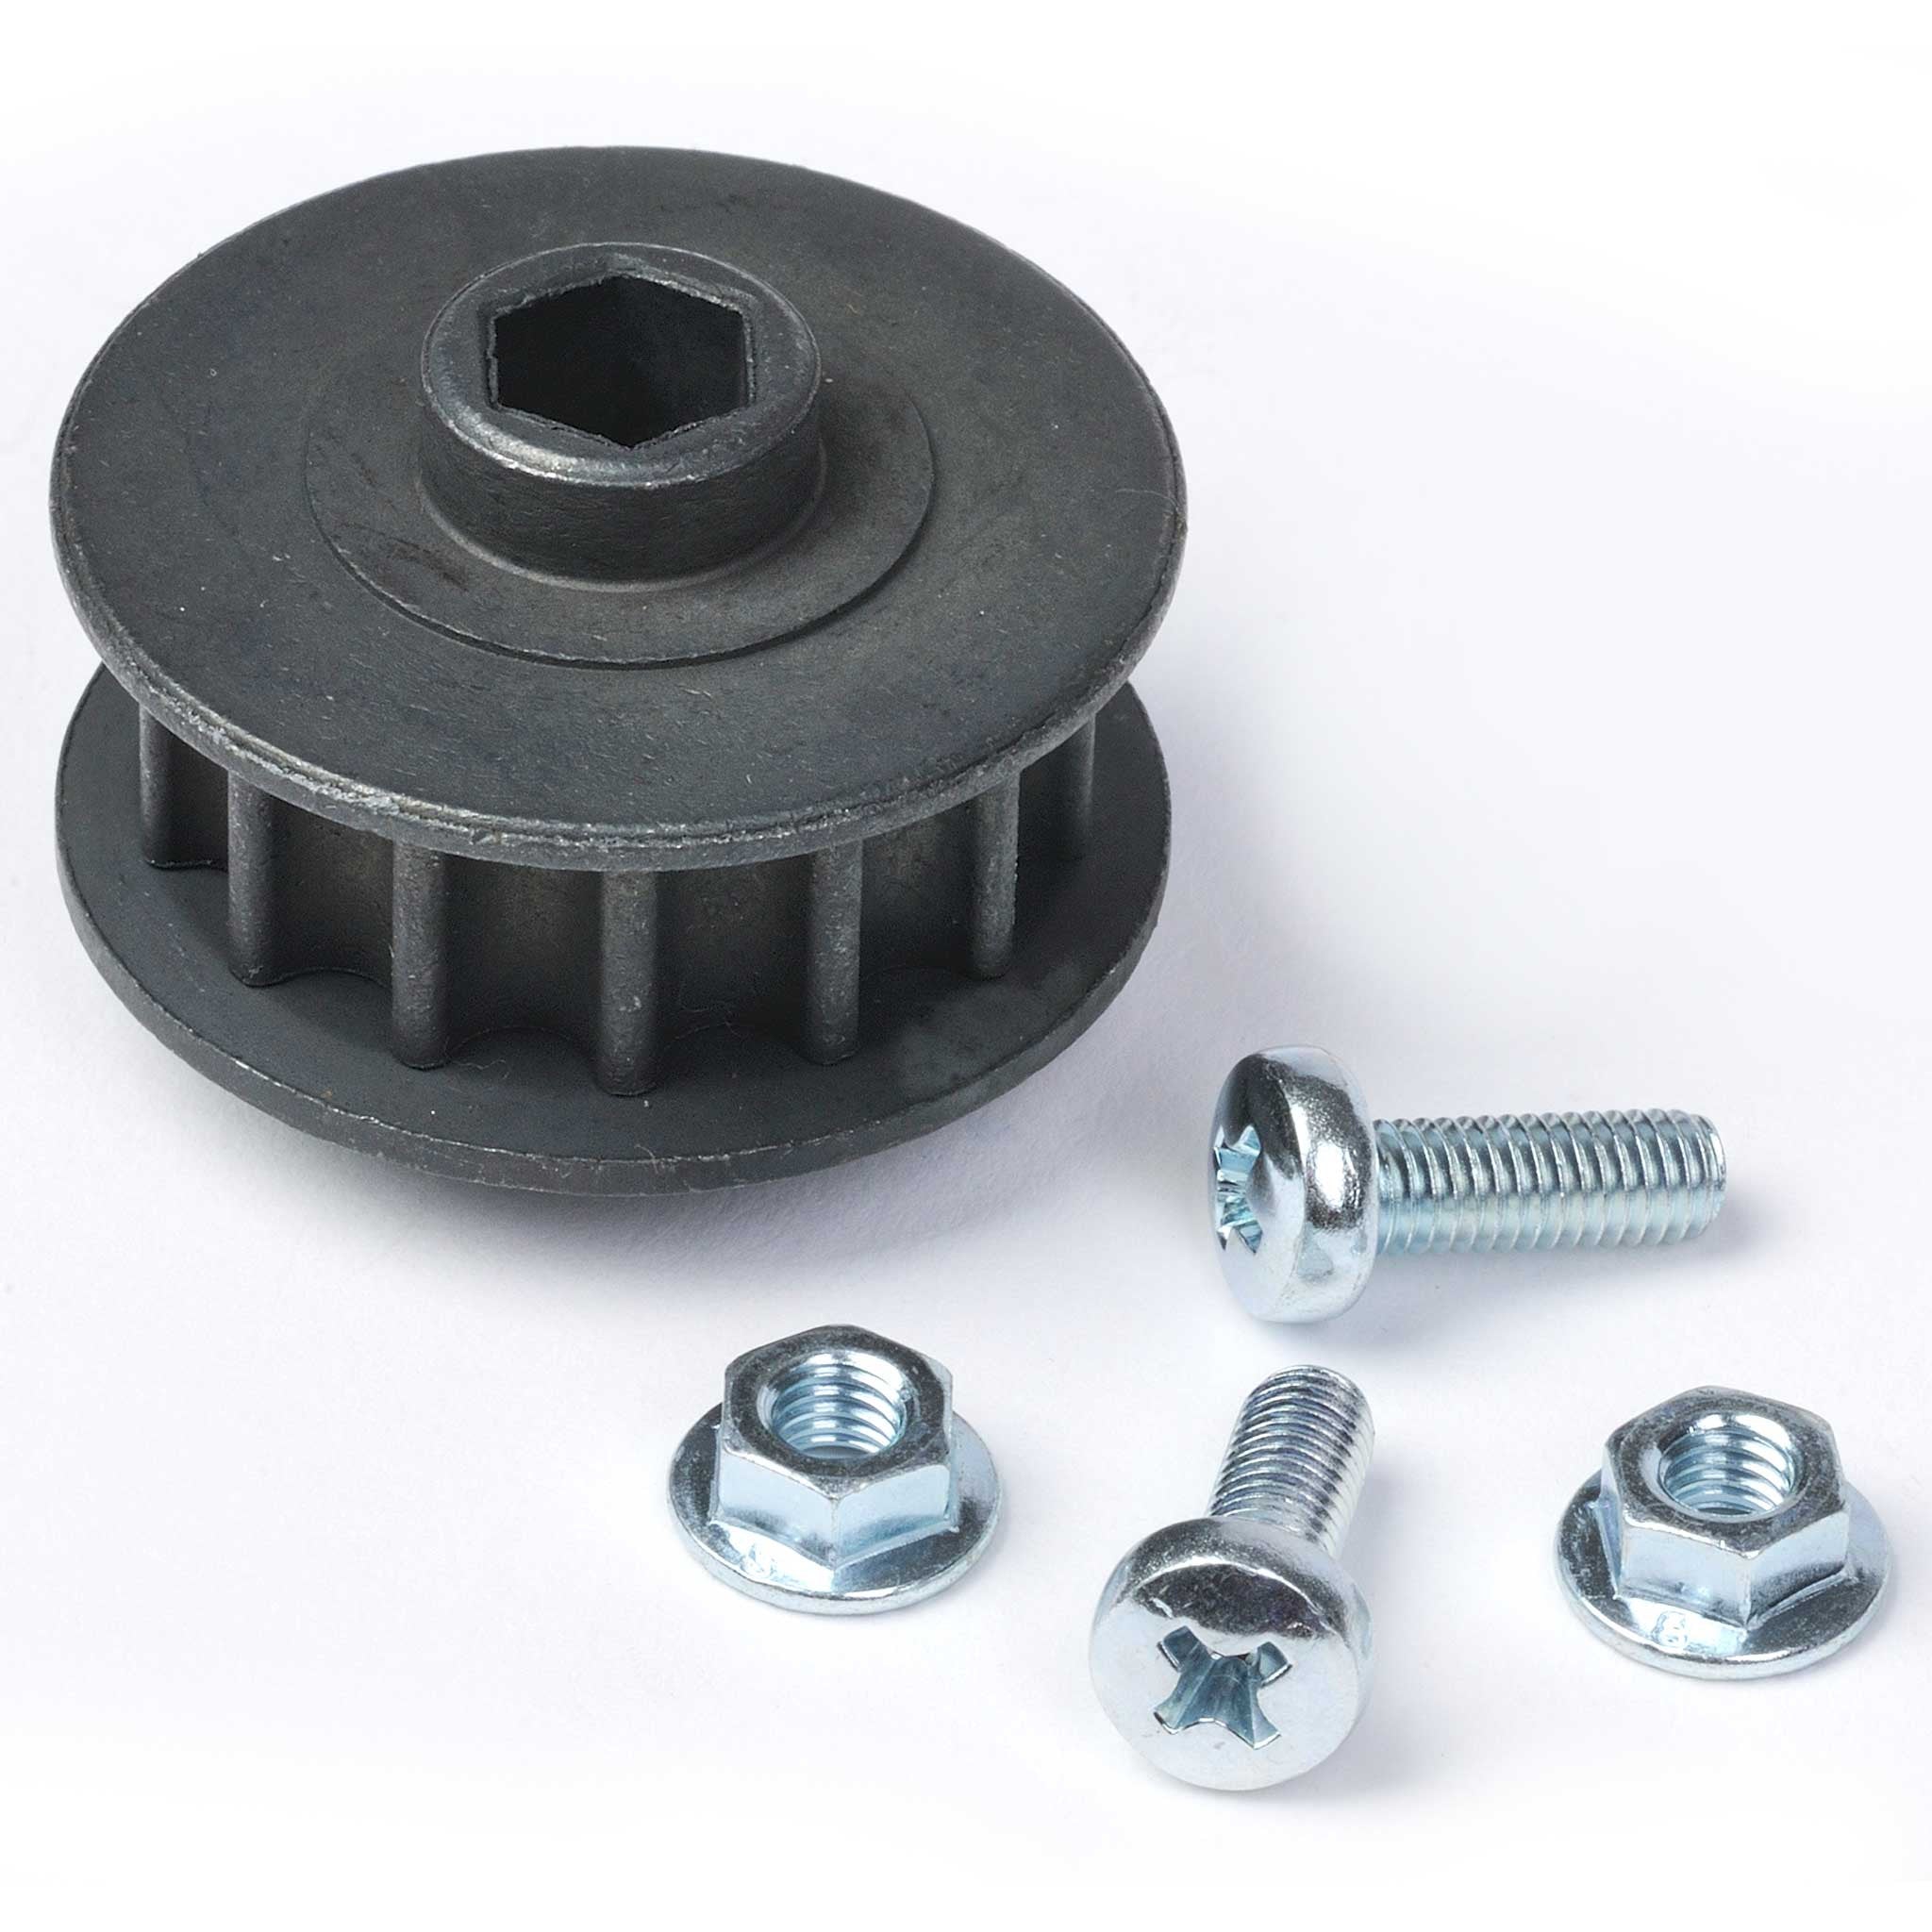 14 Tooth Belt Sprocket | Genie Replacement Part | 38416A.S